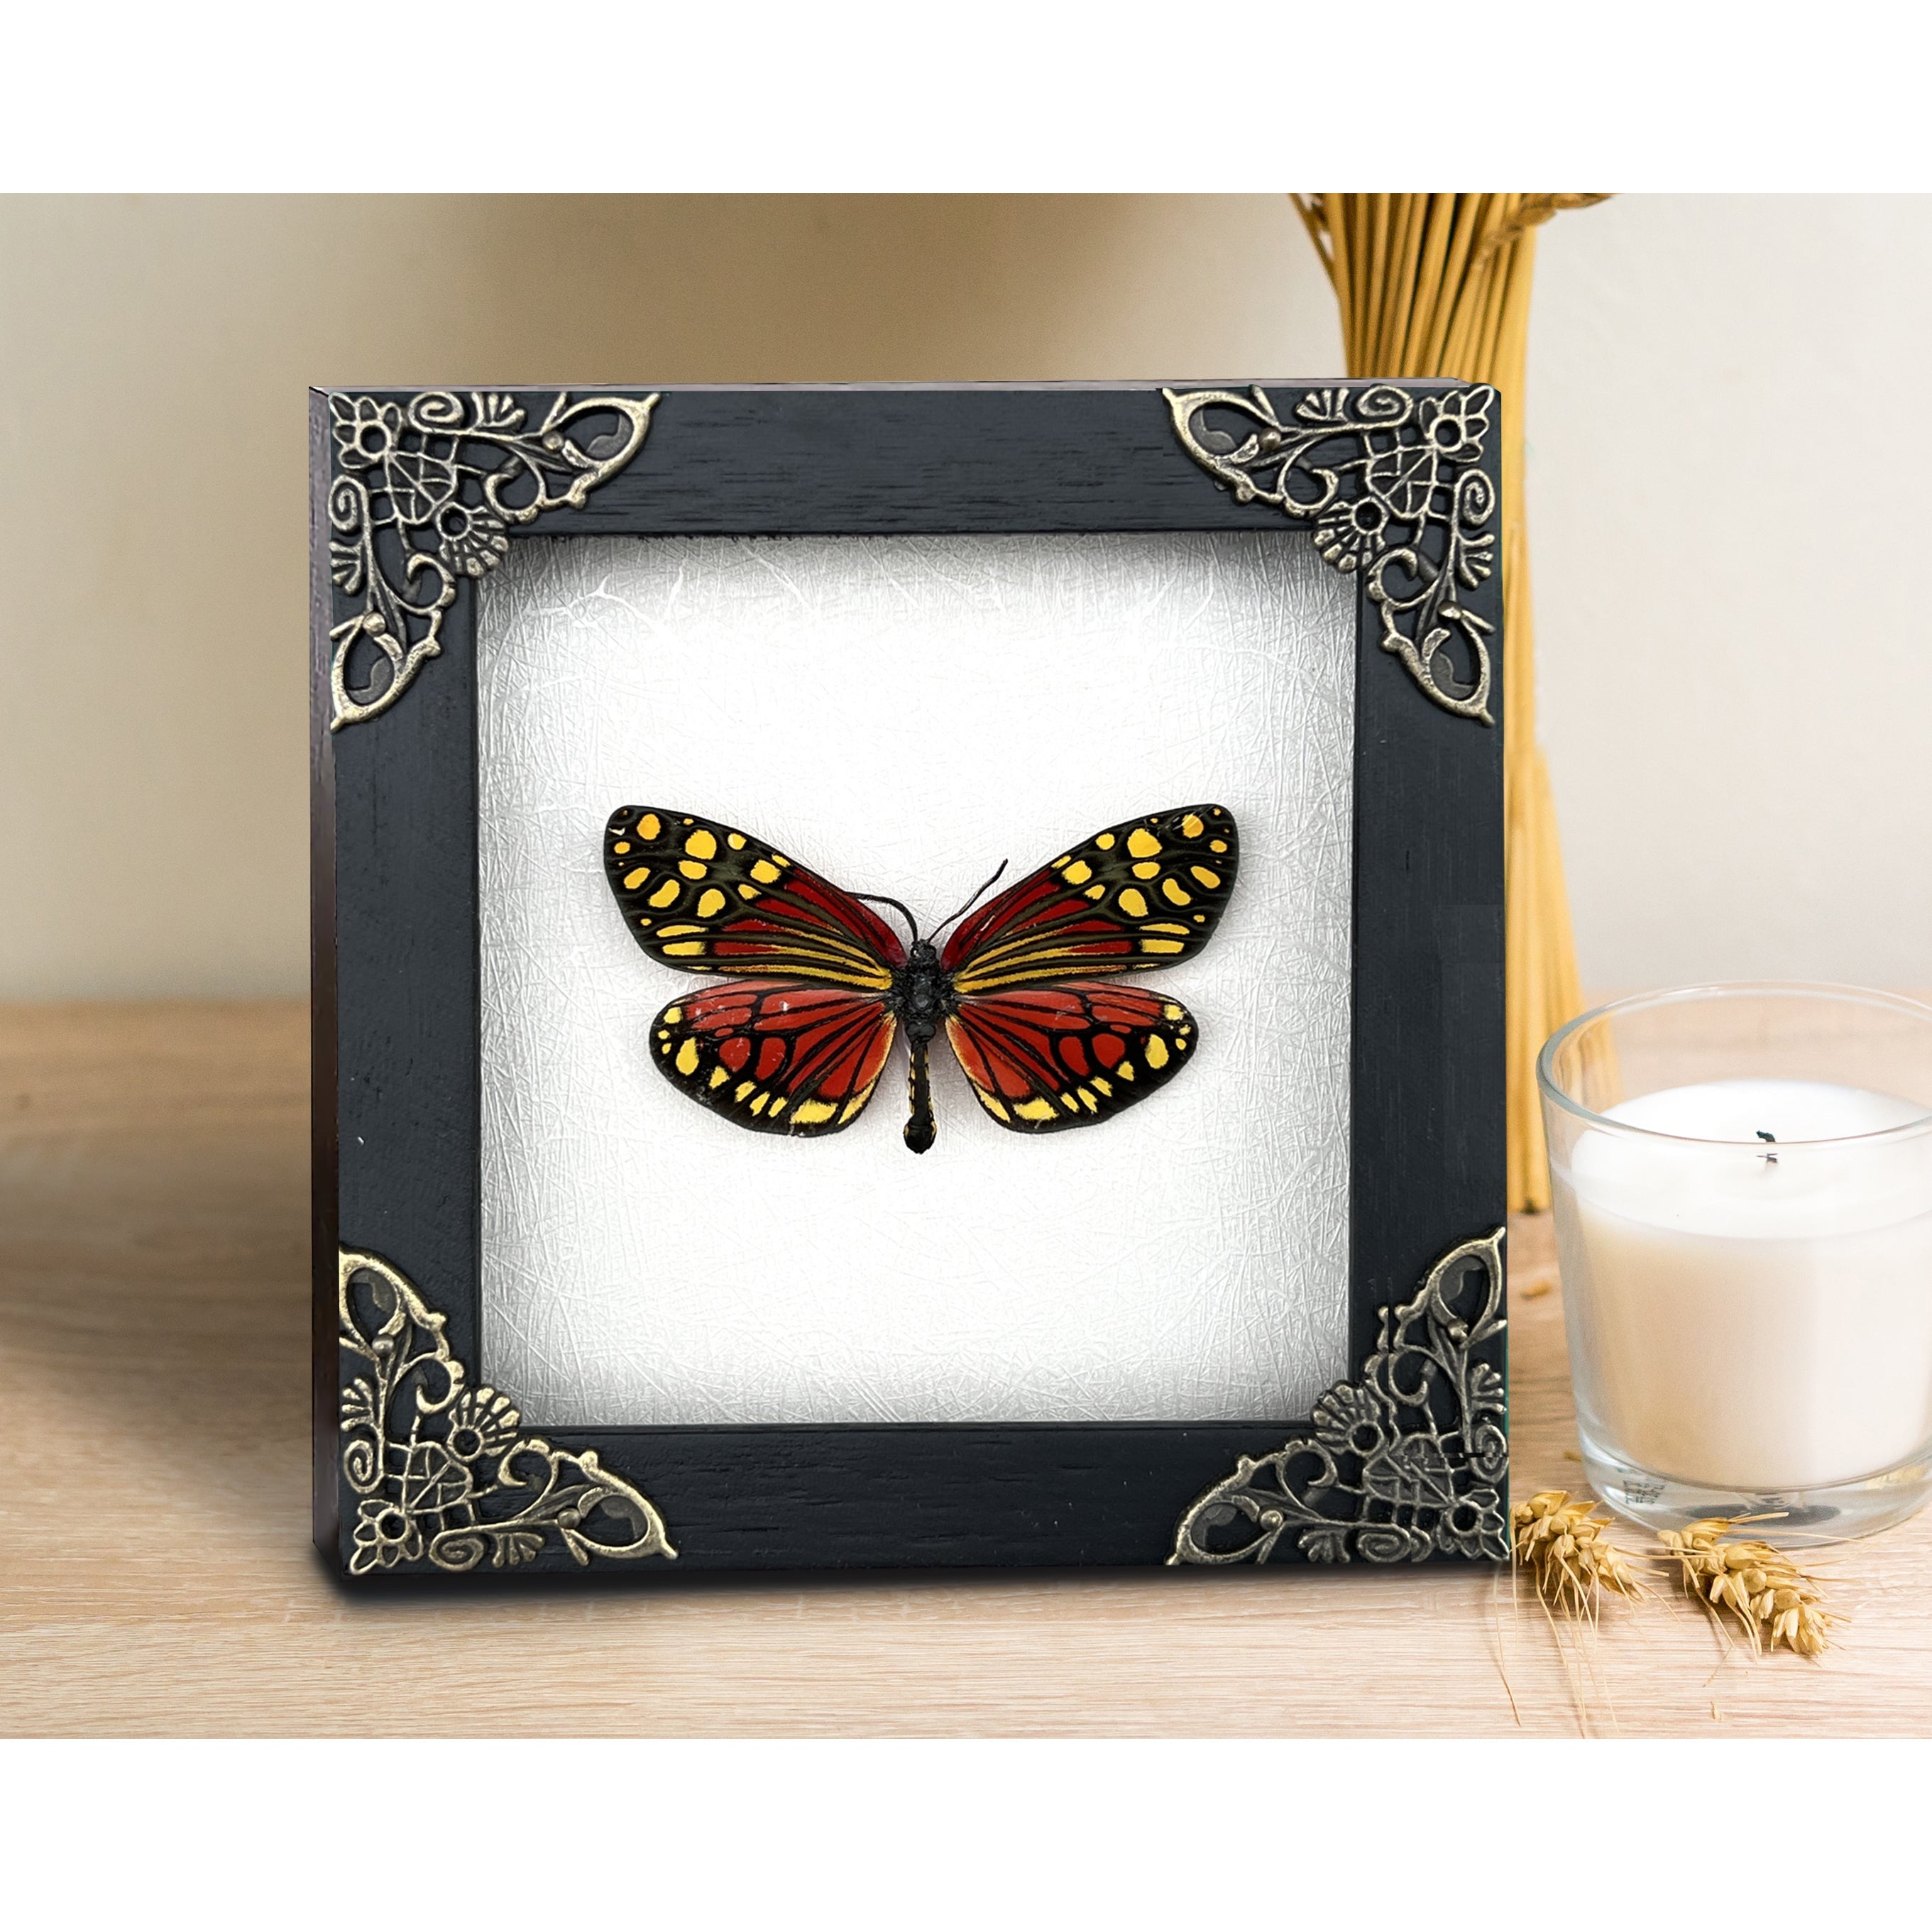 Real Framed Butterfly Handmade Shadow Box Vietnam Insect White Wood Frames Taxidermy Taxadermy Wall Art Decoration Artwork - Vinacreations